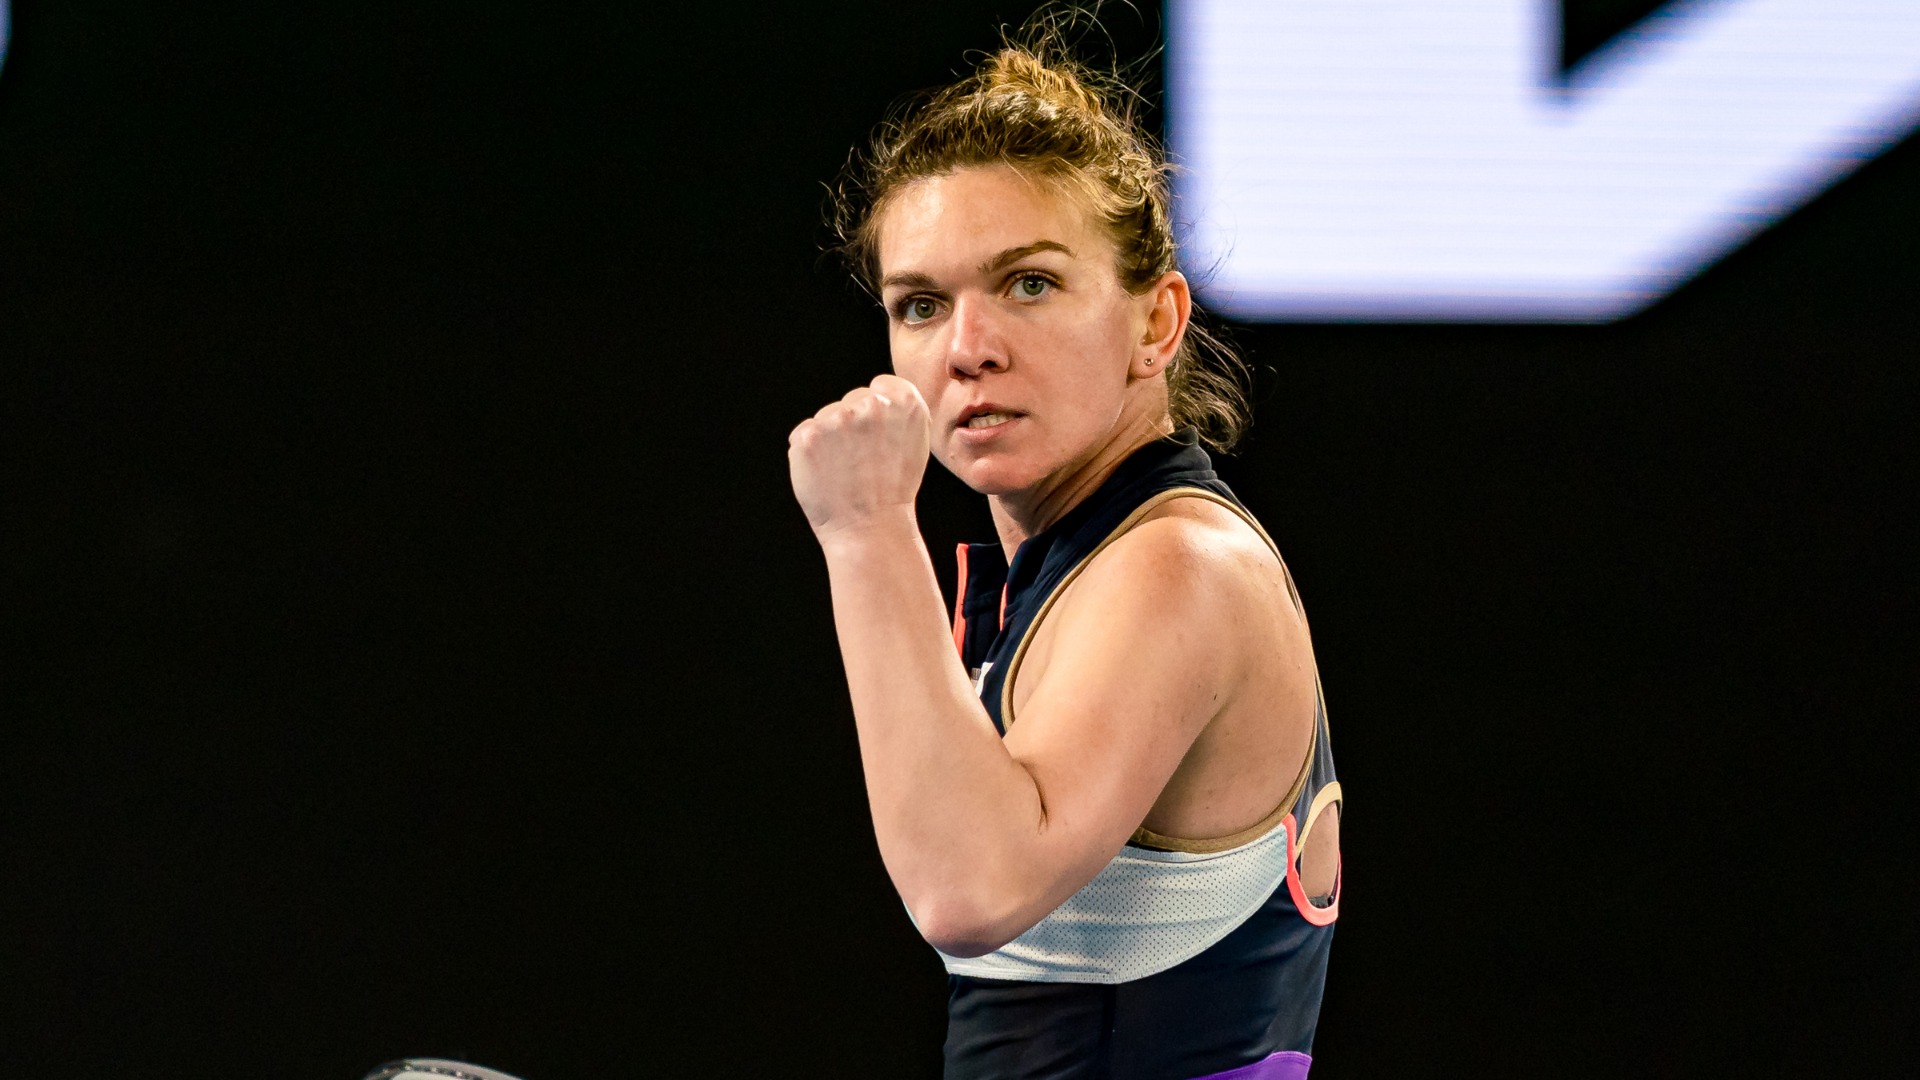 Australian Open: Halep confident ahead of duel with 'legend' Williams, Osaka embraces her anger